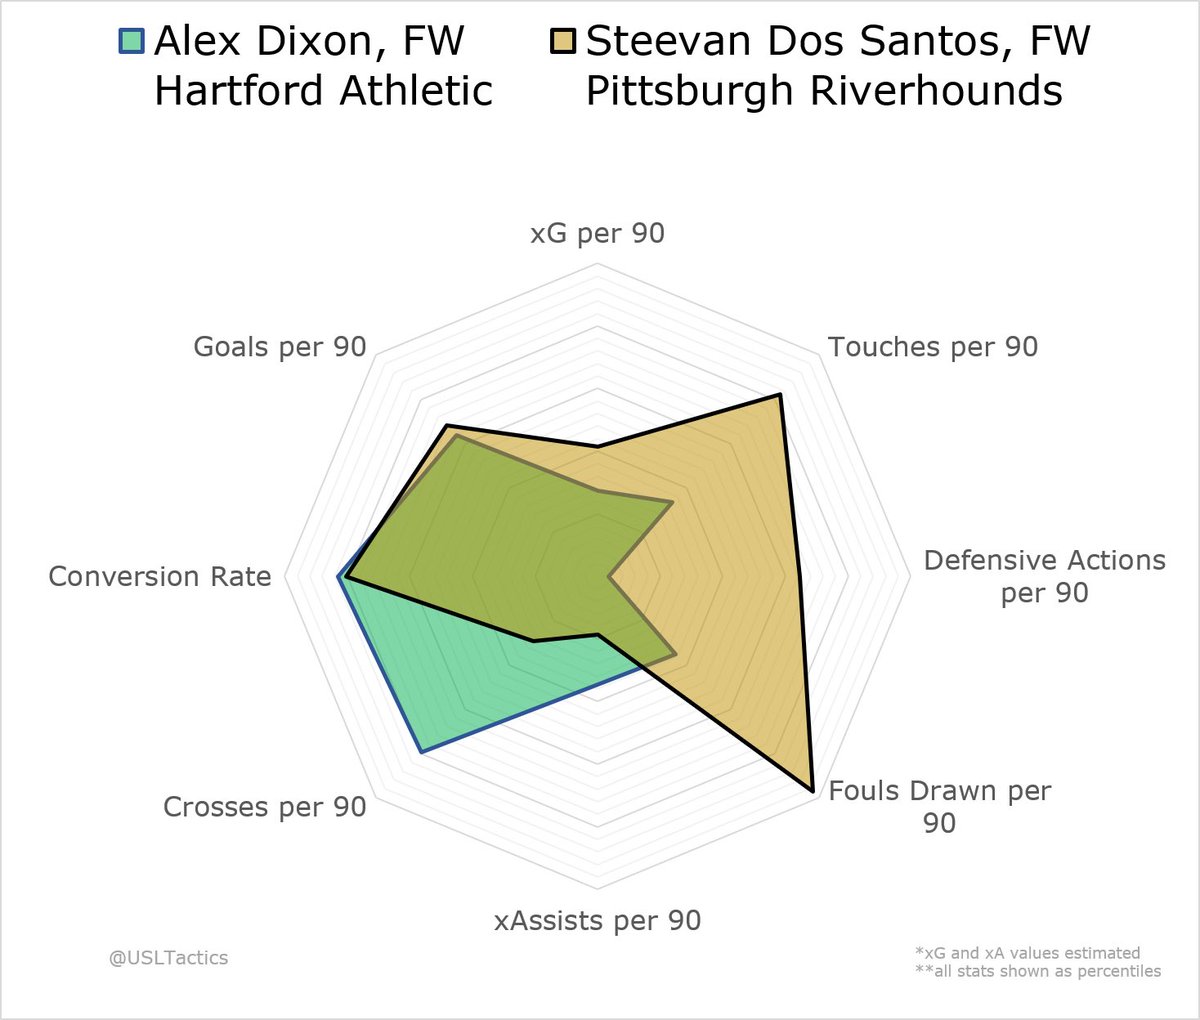 At striker, Steevan Dos Santos headed to Tampa only to be replaced by Alex Dixon, a Lilley favorite. Dos Santos gives you more pressing and hold-up skill, but Dixon provides much more spark and self-creation.